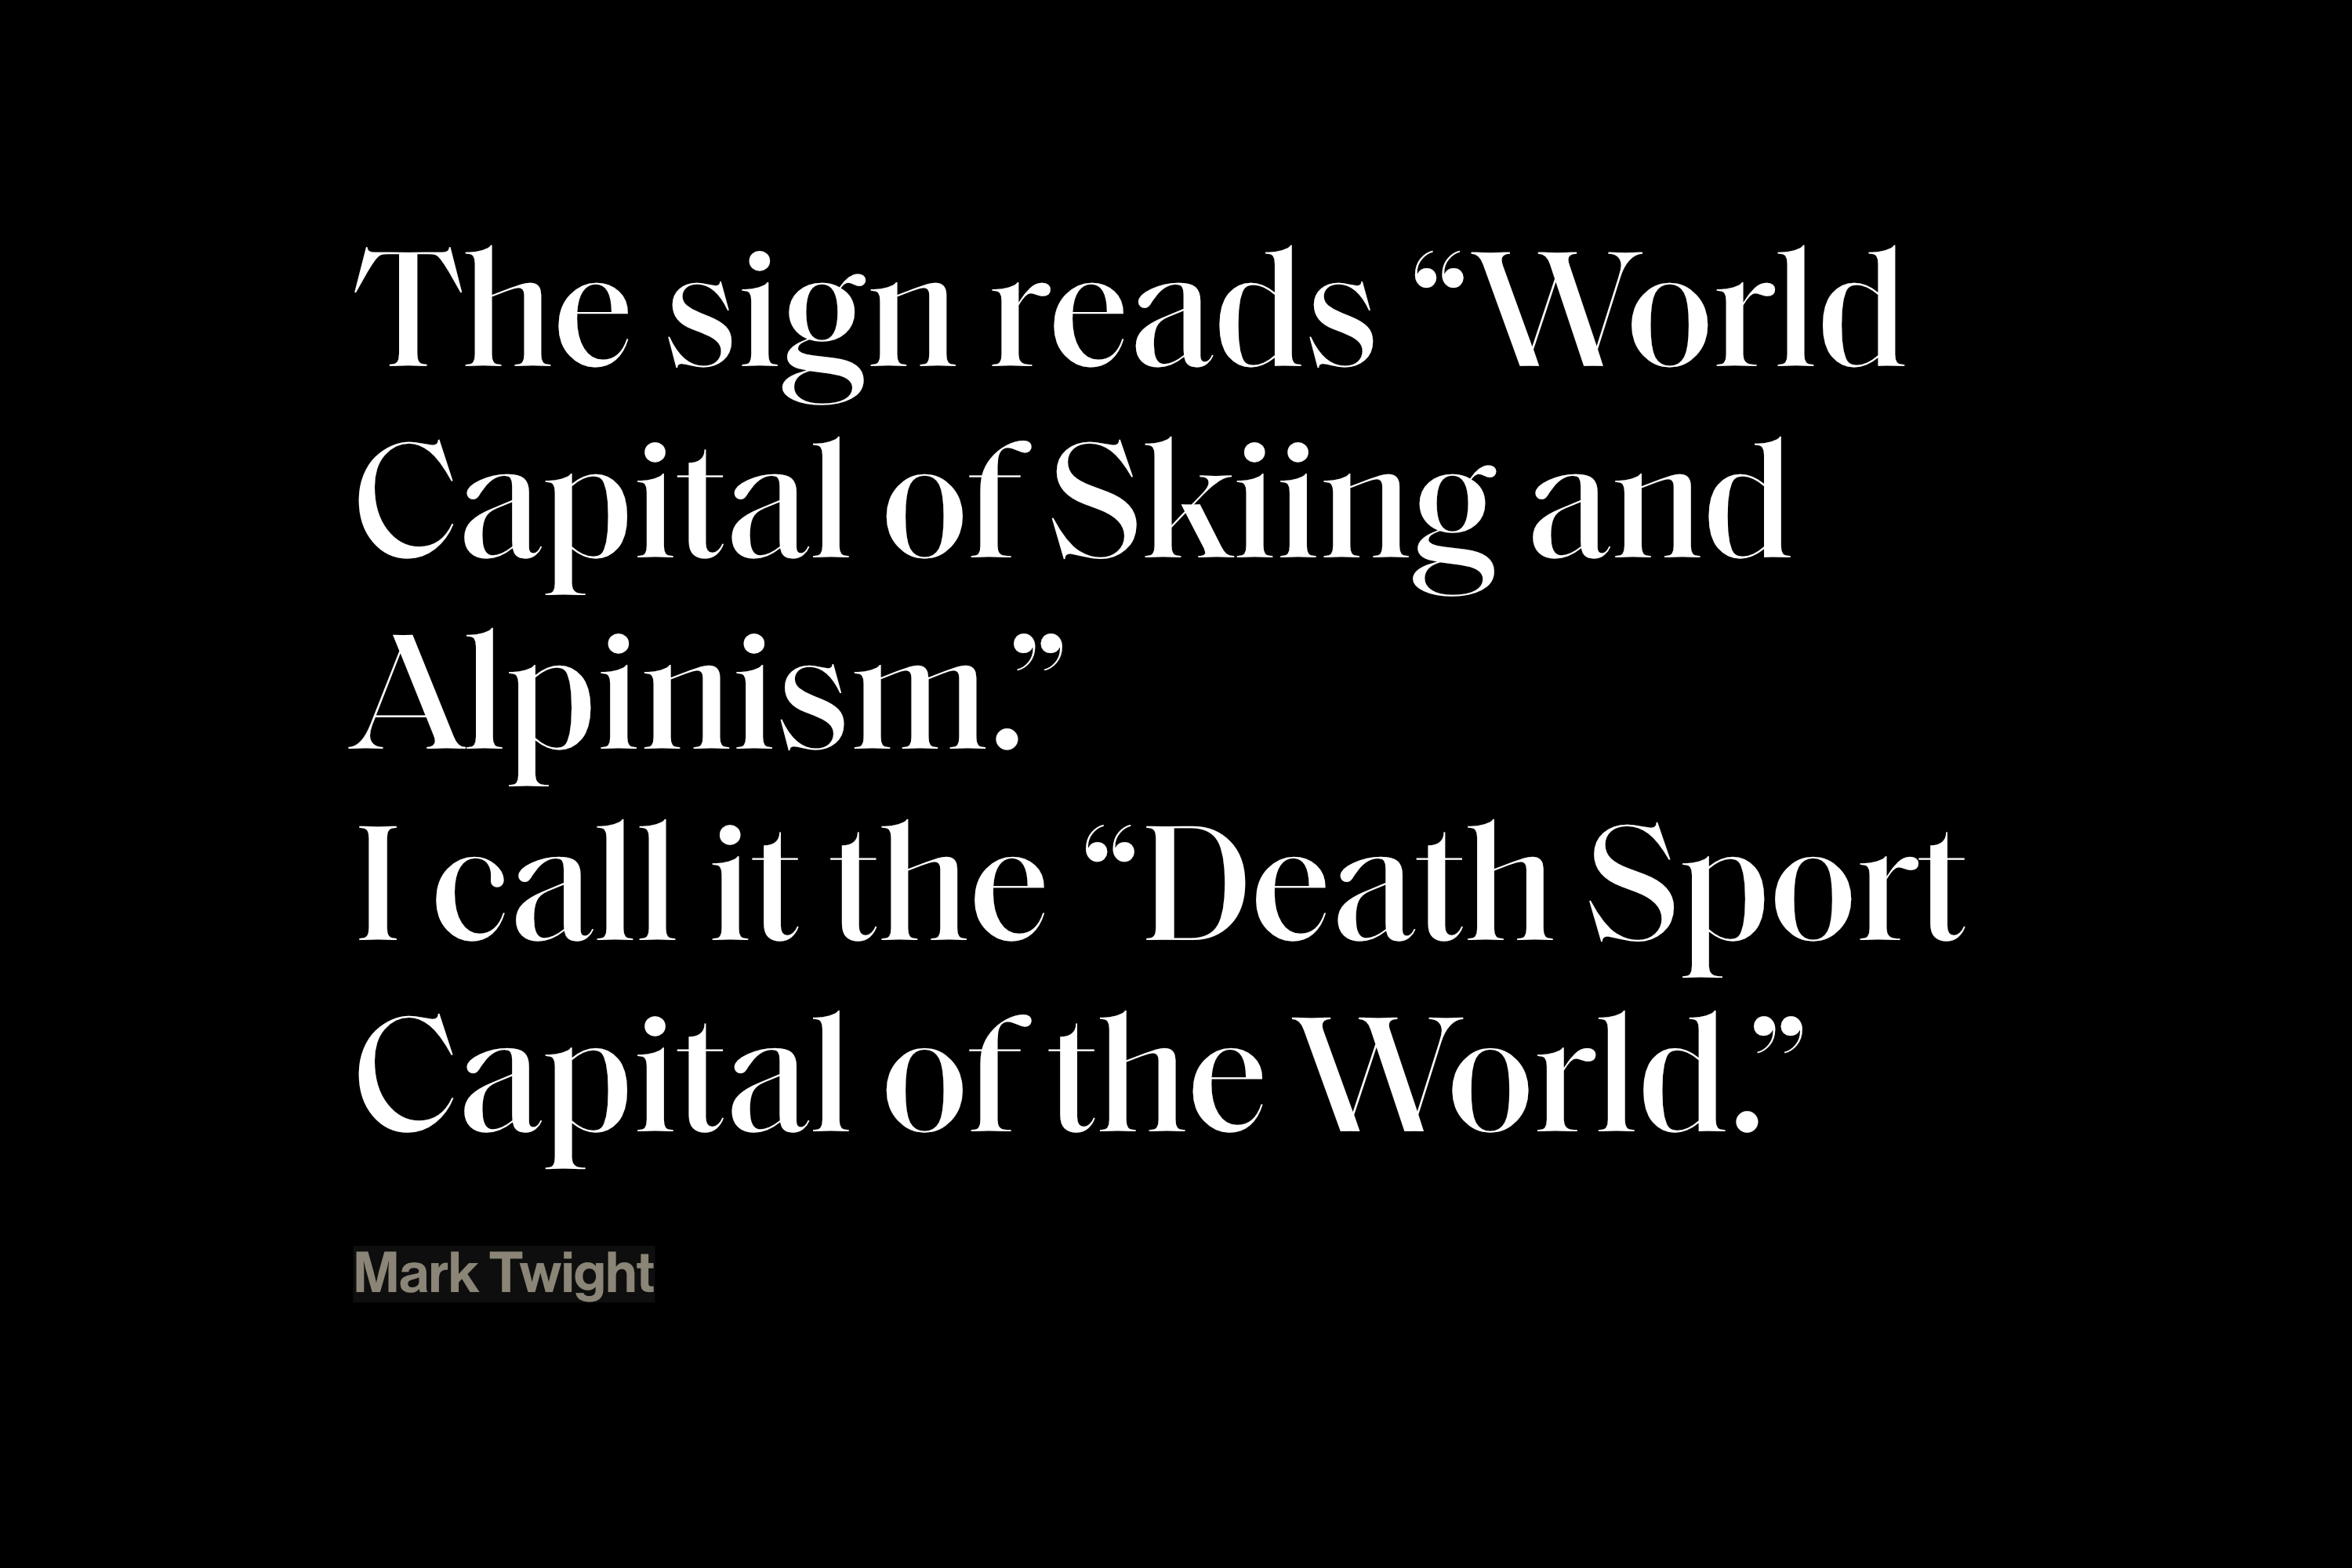 Death sport capital of the World - Mark Twight quote